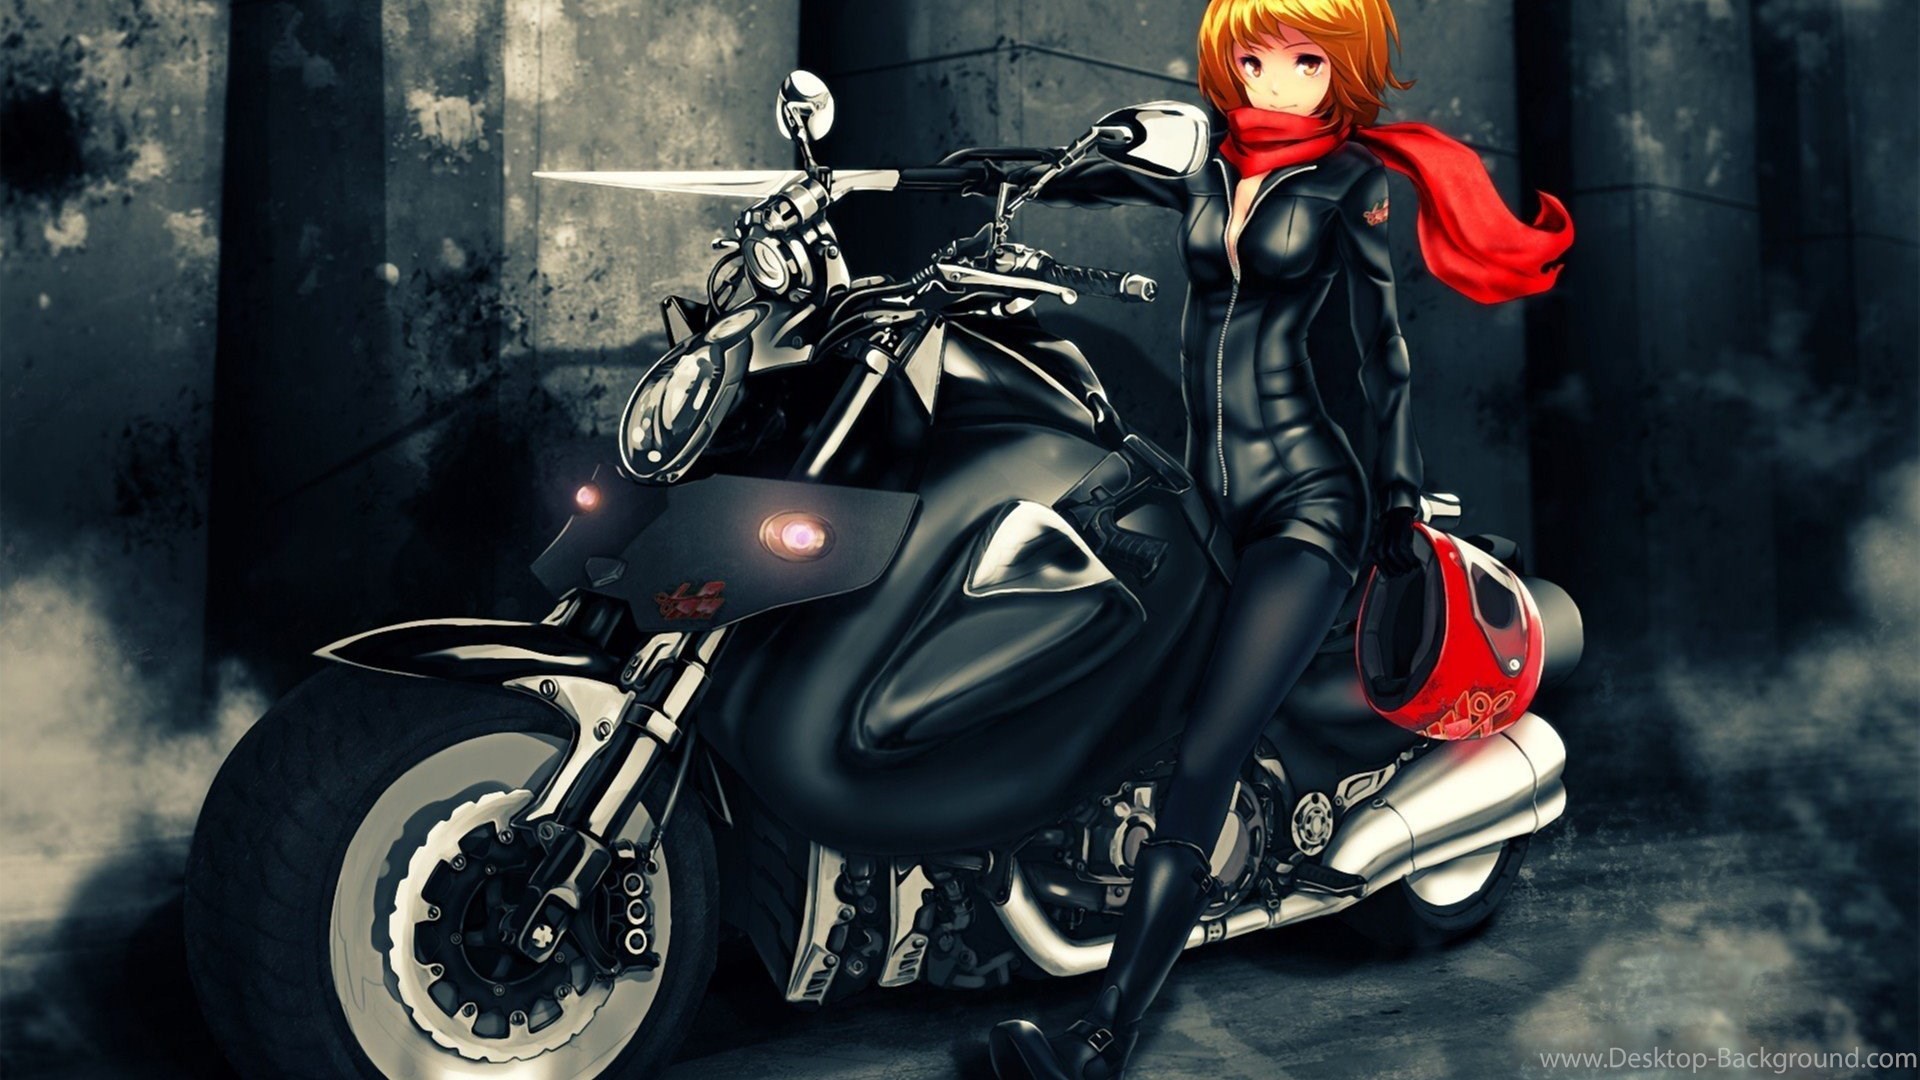 150+ Girls & Motorcycles HD Wallpapers and Backgrounds